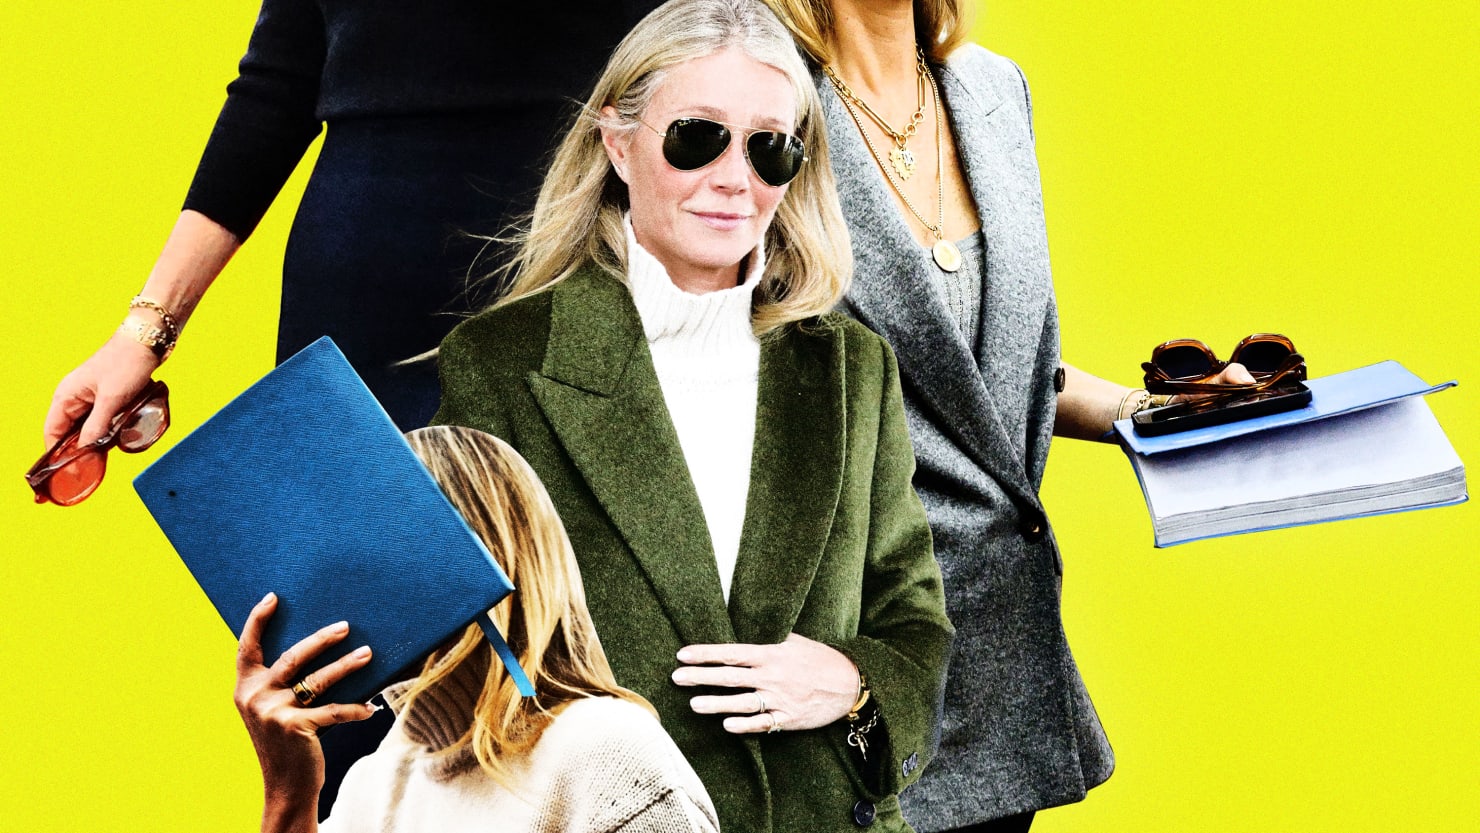 Gwyneth Paltrow’s experimental dress is a polite middle finger.